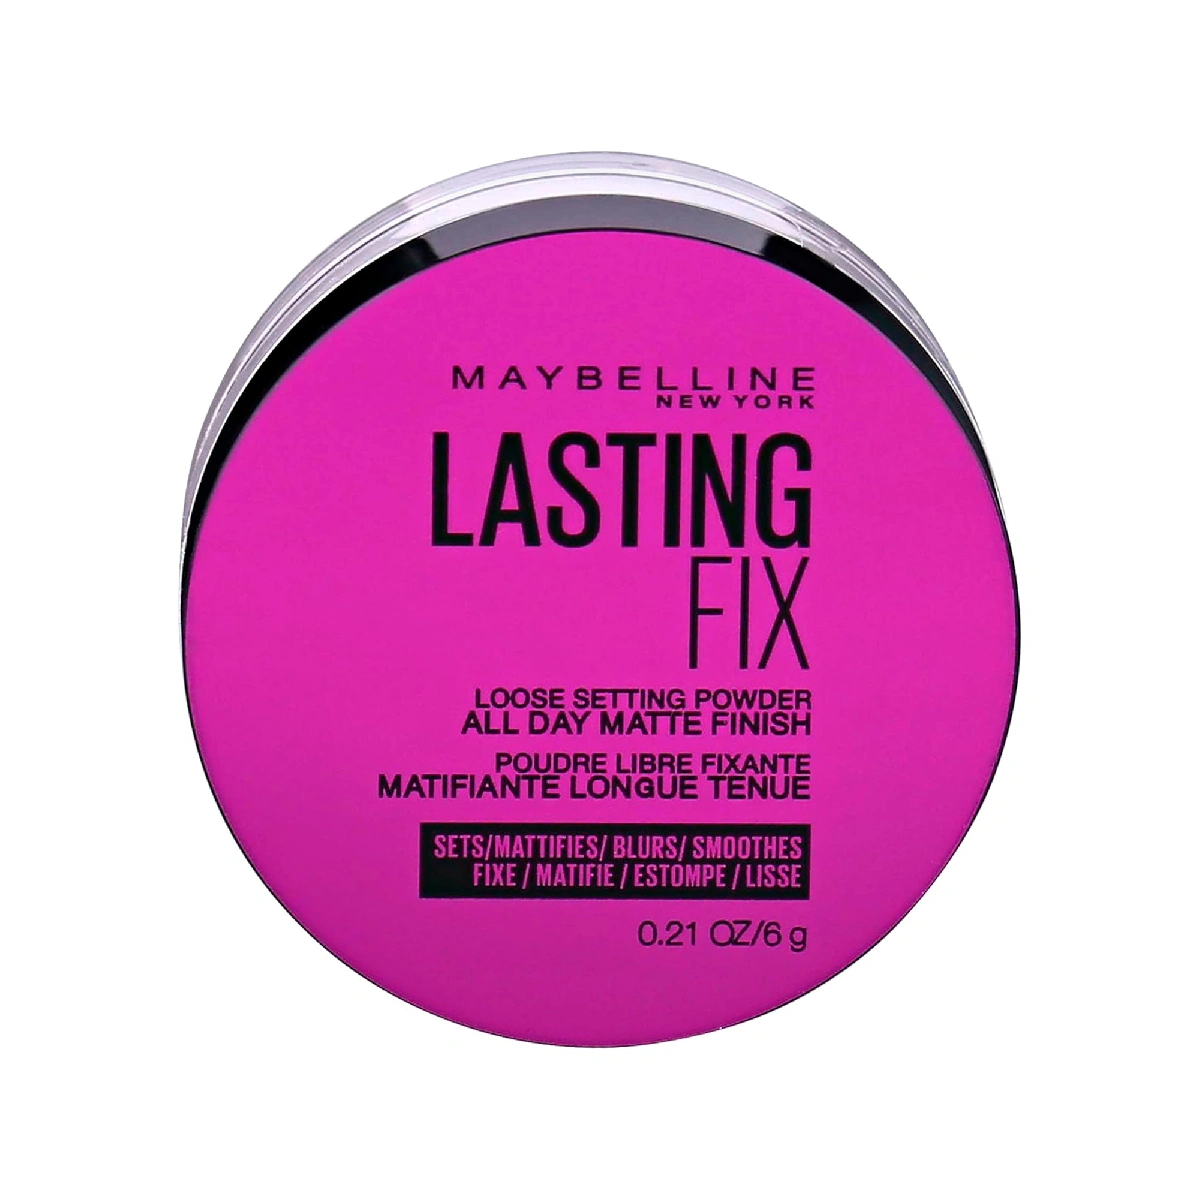 Maybelline Master Fix Loose Translucent Setting Powder - loose powder container.